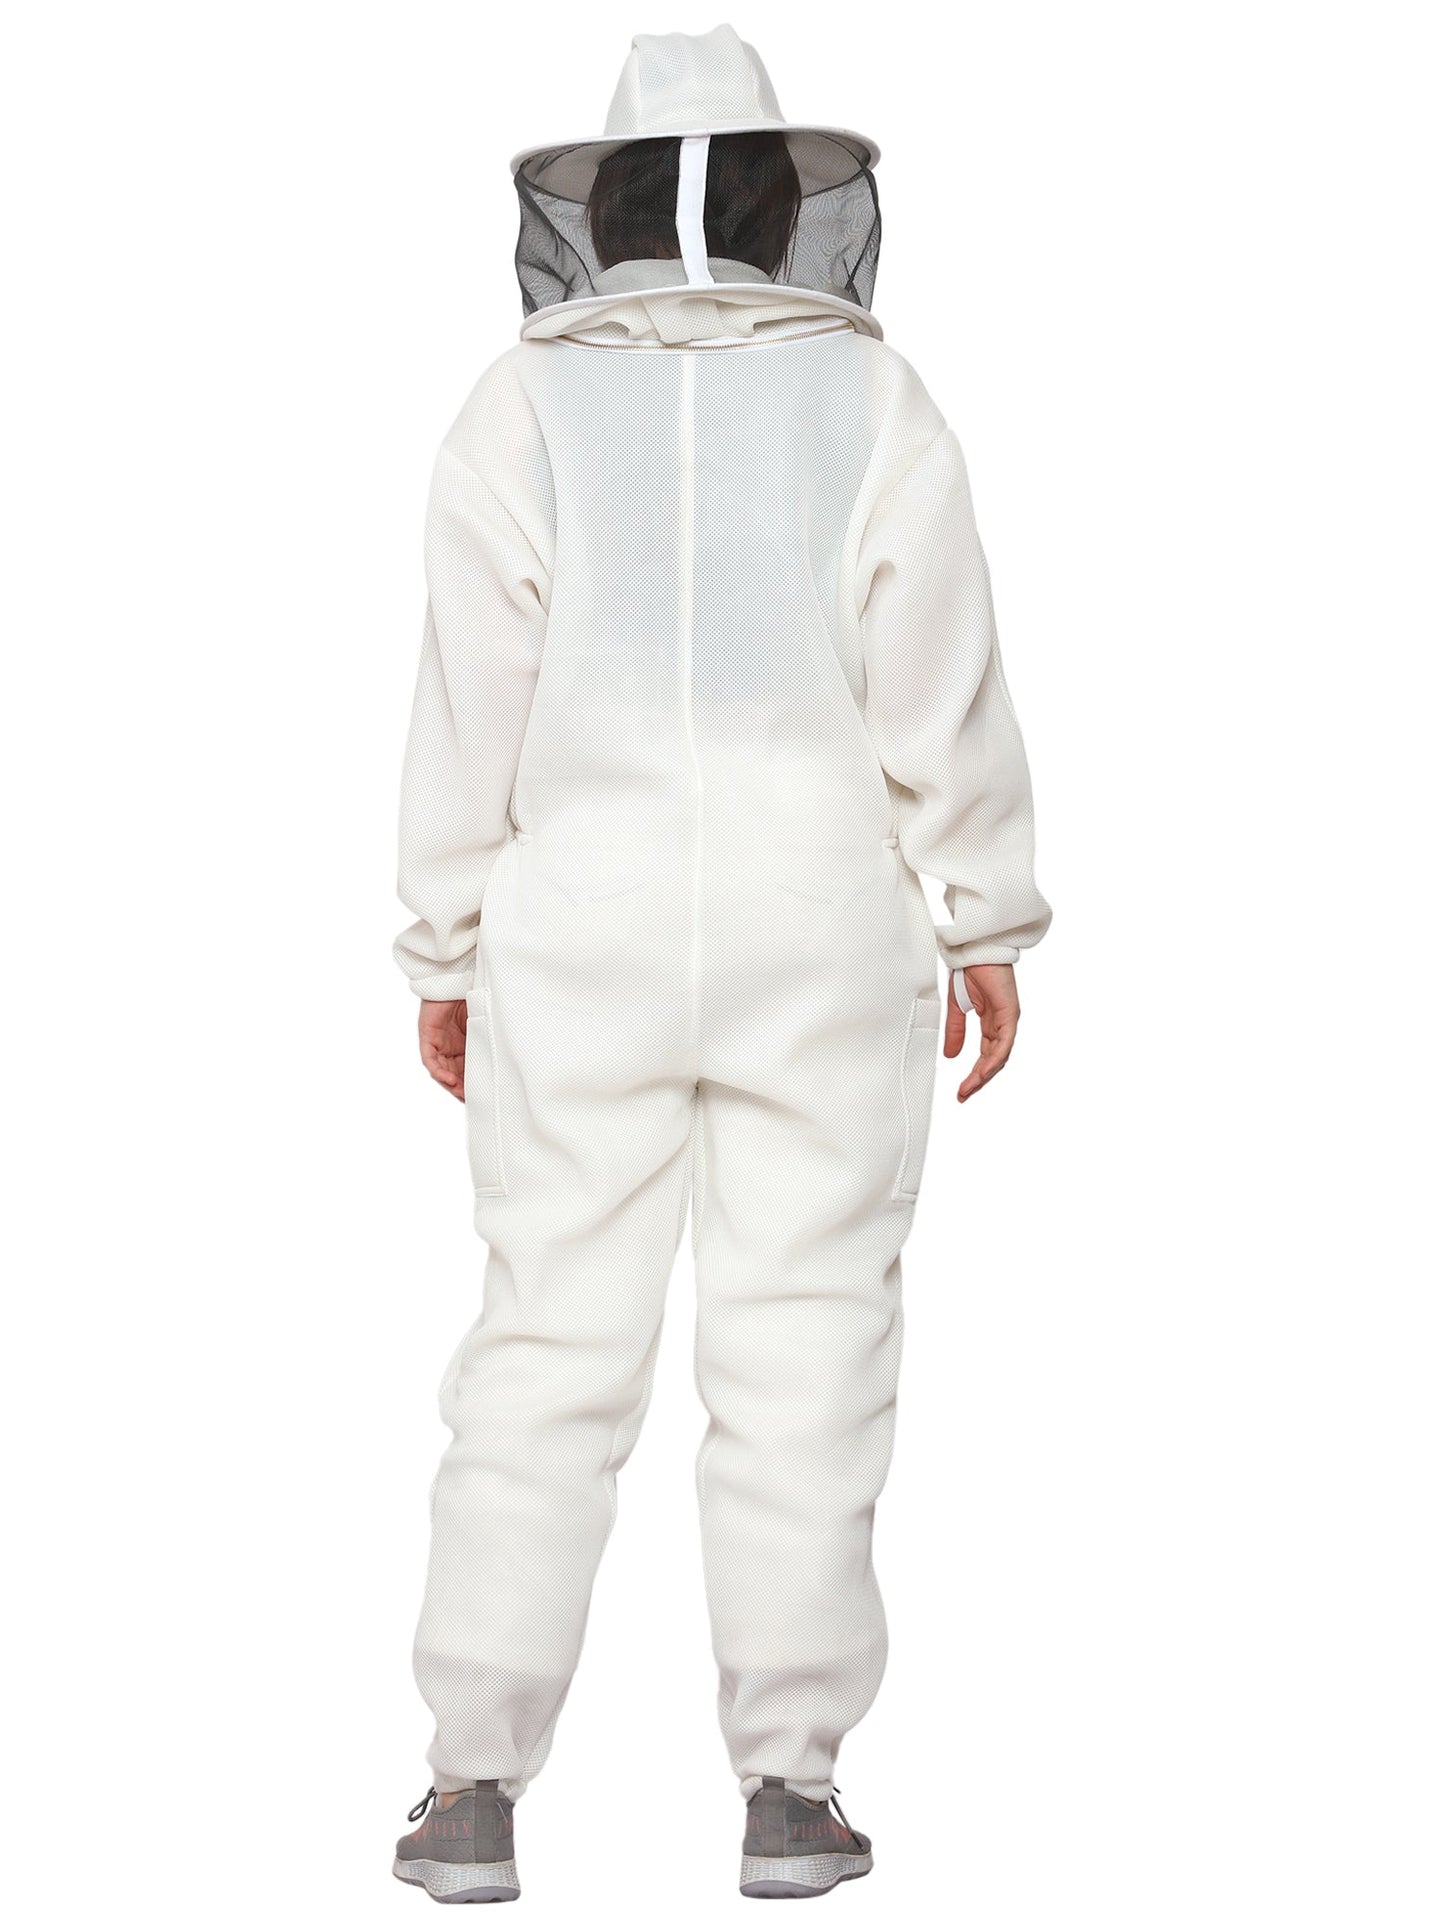 Beeattire Airmesh Ventilated beekeeping Suit White Color with Round Hood For Women